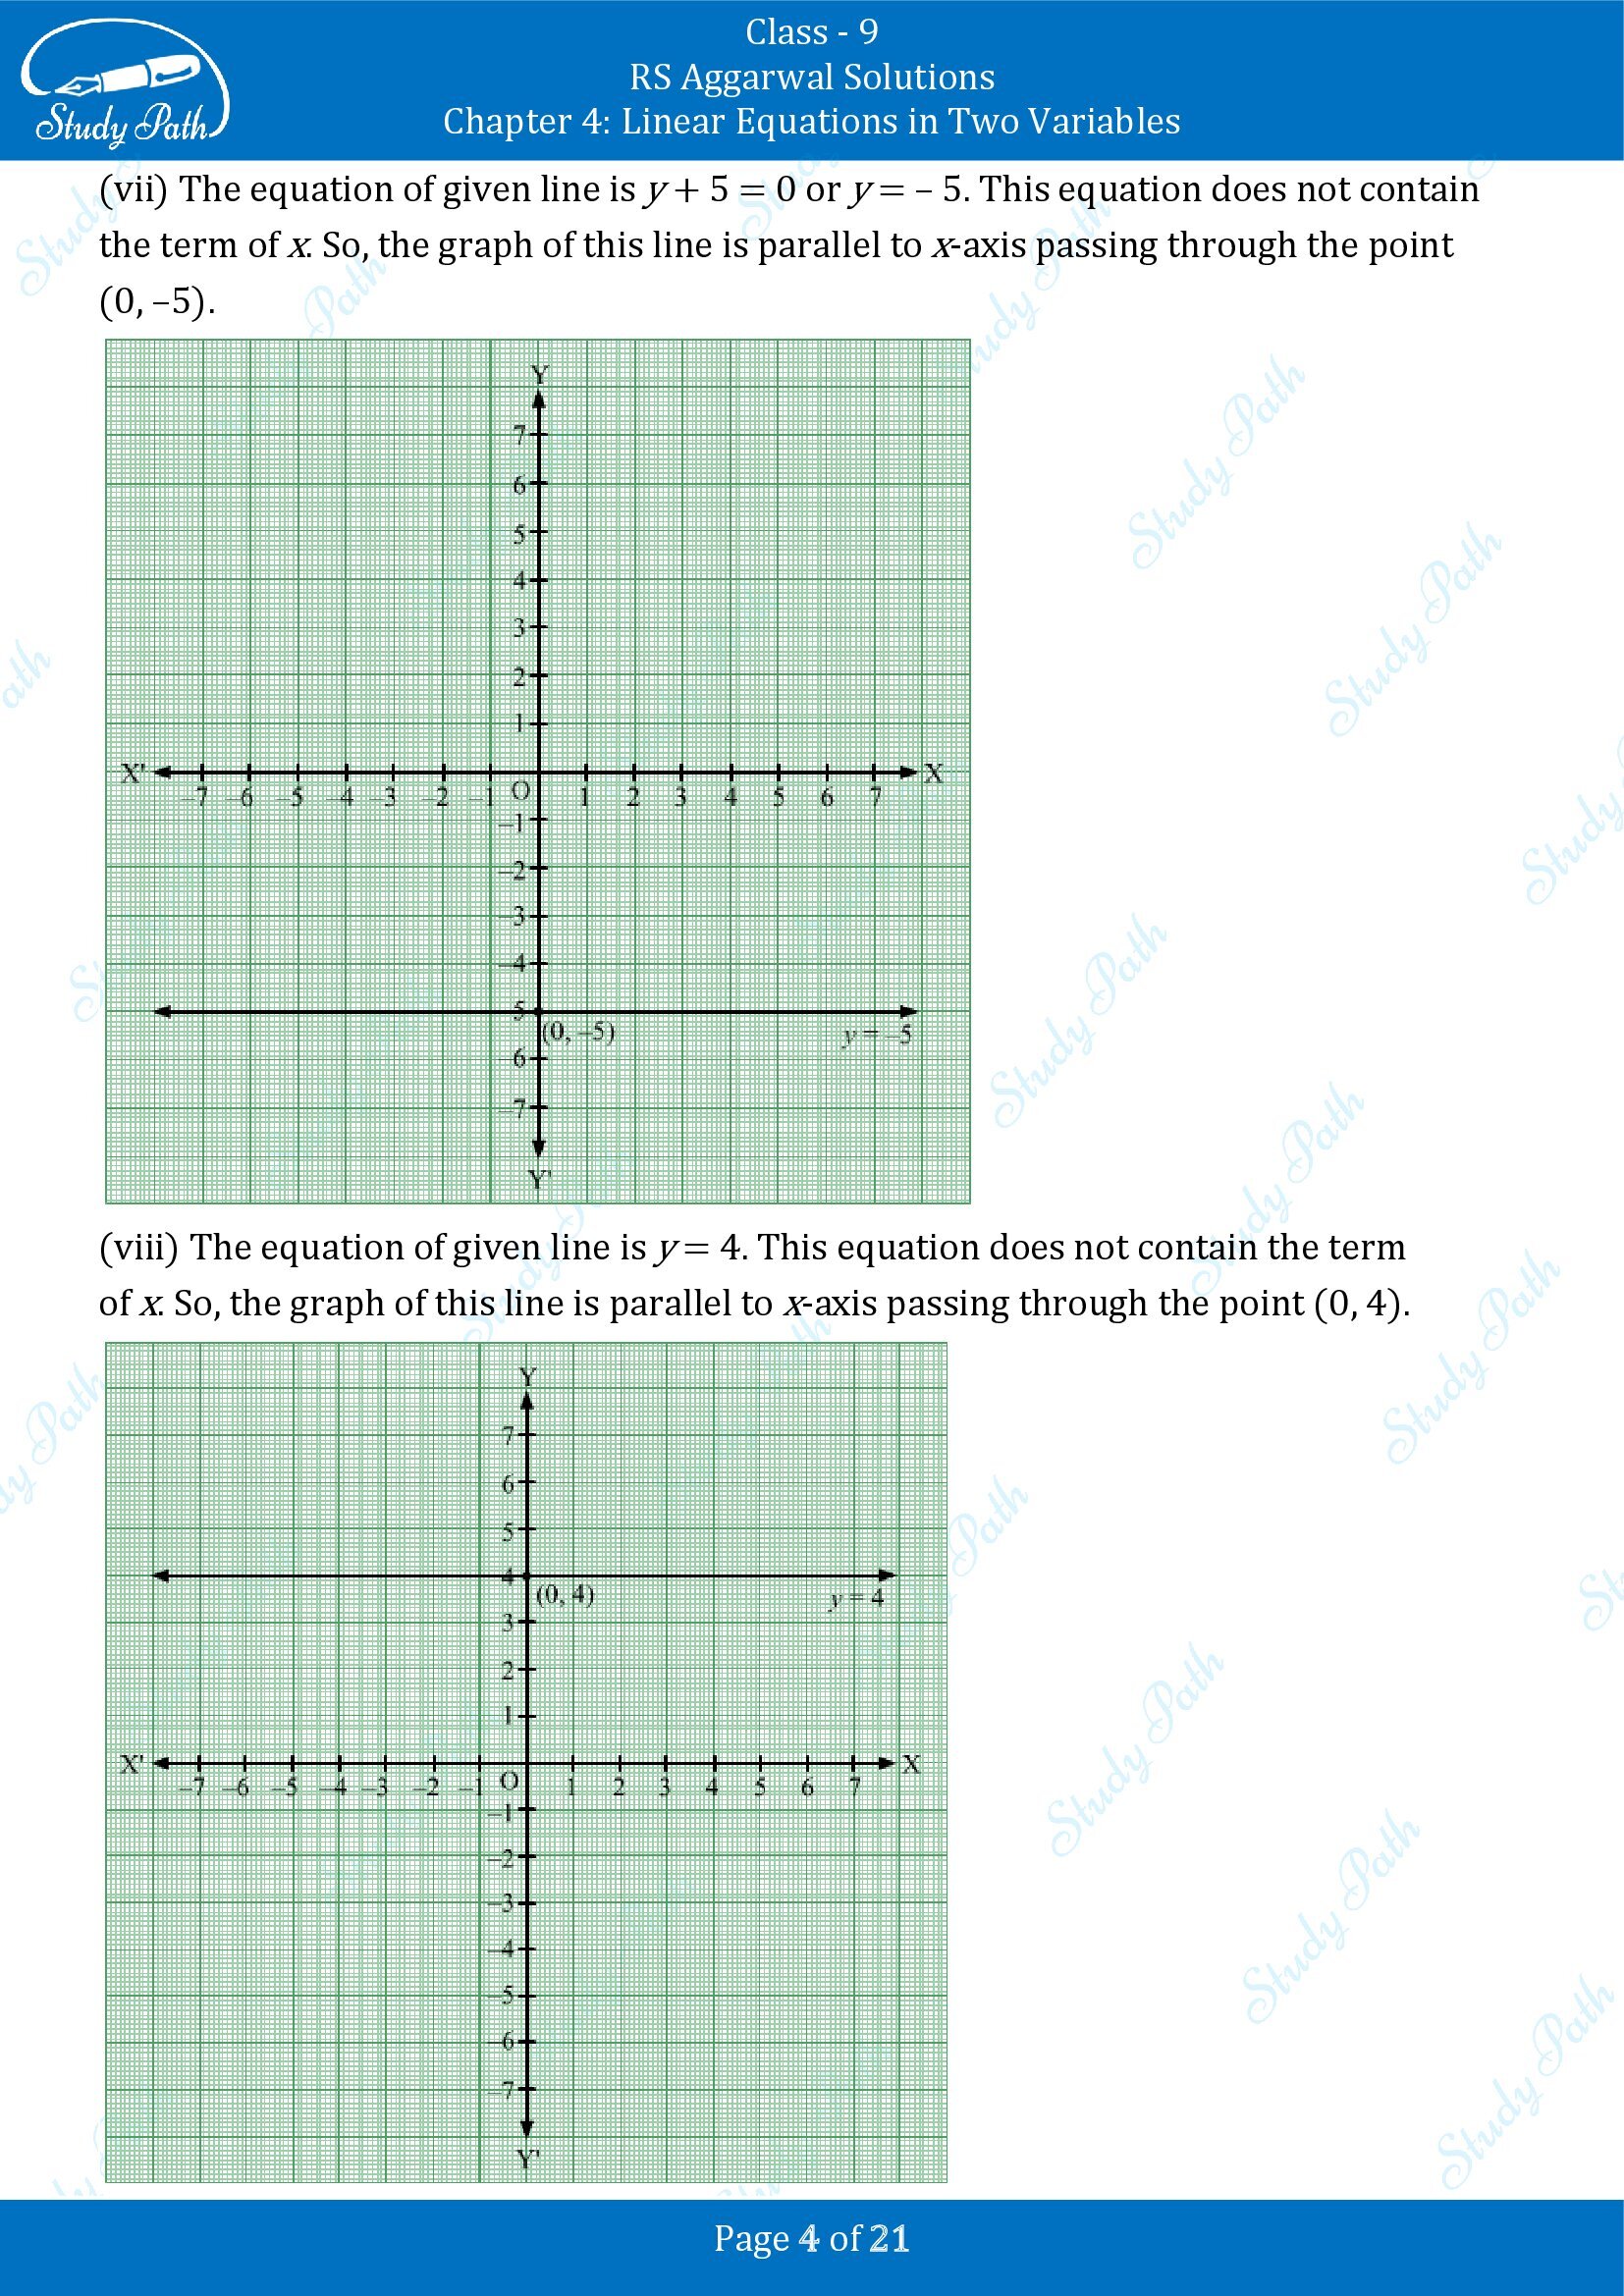 RS Aggarwal Solutions Class 9 Chapter 4 Linear Equations in Two Variables Exercise 4B 00004